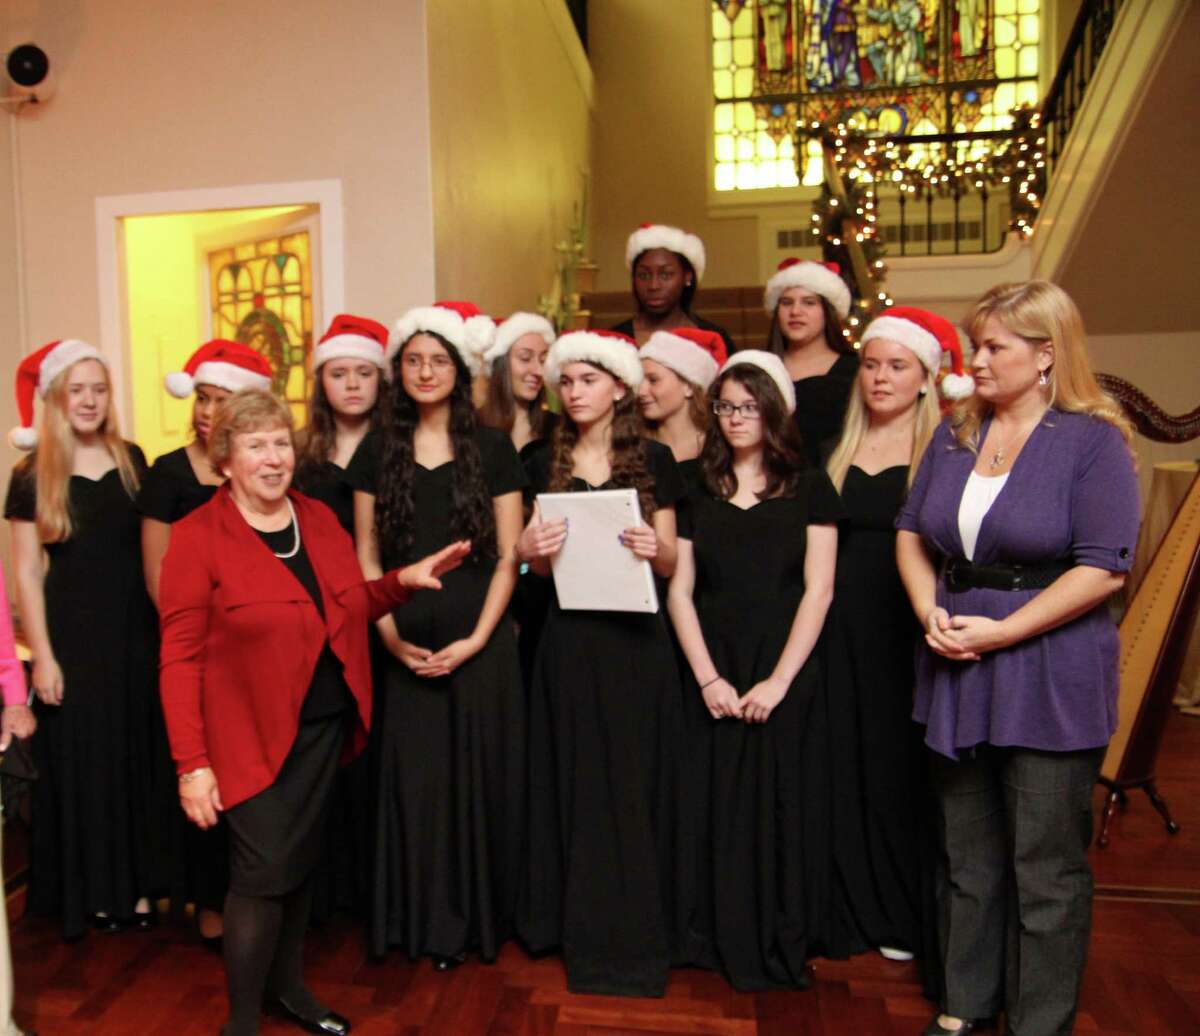 Convent of the Sacred Heartís Madrigals singing group will sing "Carol of the Bells" live on NBCís ìTodayî show at 9 a.m. Thursday, Dec. 20, 2012, outside NBC Studios at 30 Rockefeller Plaza in New York City. The performance will be broadcast around the country. Pictured here Dec. 8, Jayne Collins, left in red, the head of the Upper School at Convent of the Sacred Heart, announces that the madrigals, wearing black, would perform on the show. At right is Music Director Annette Etheridge.